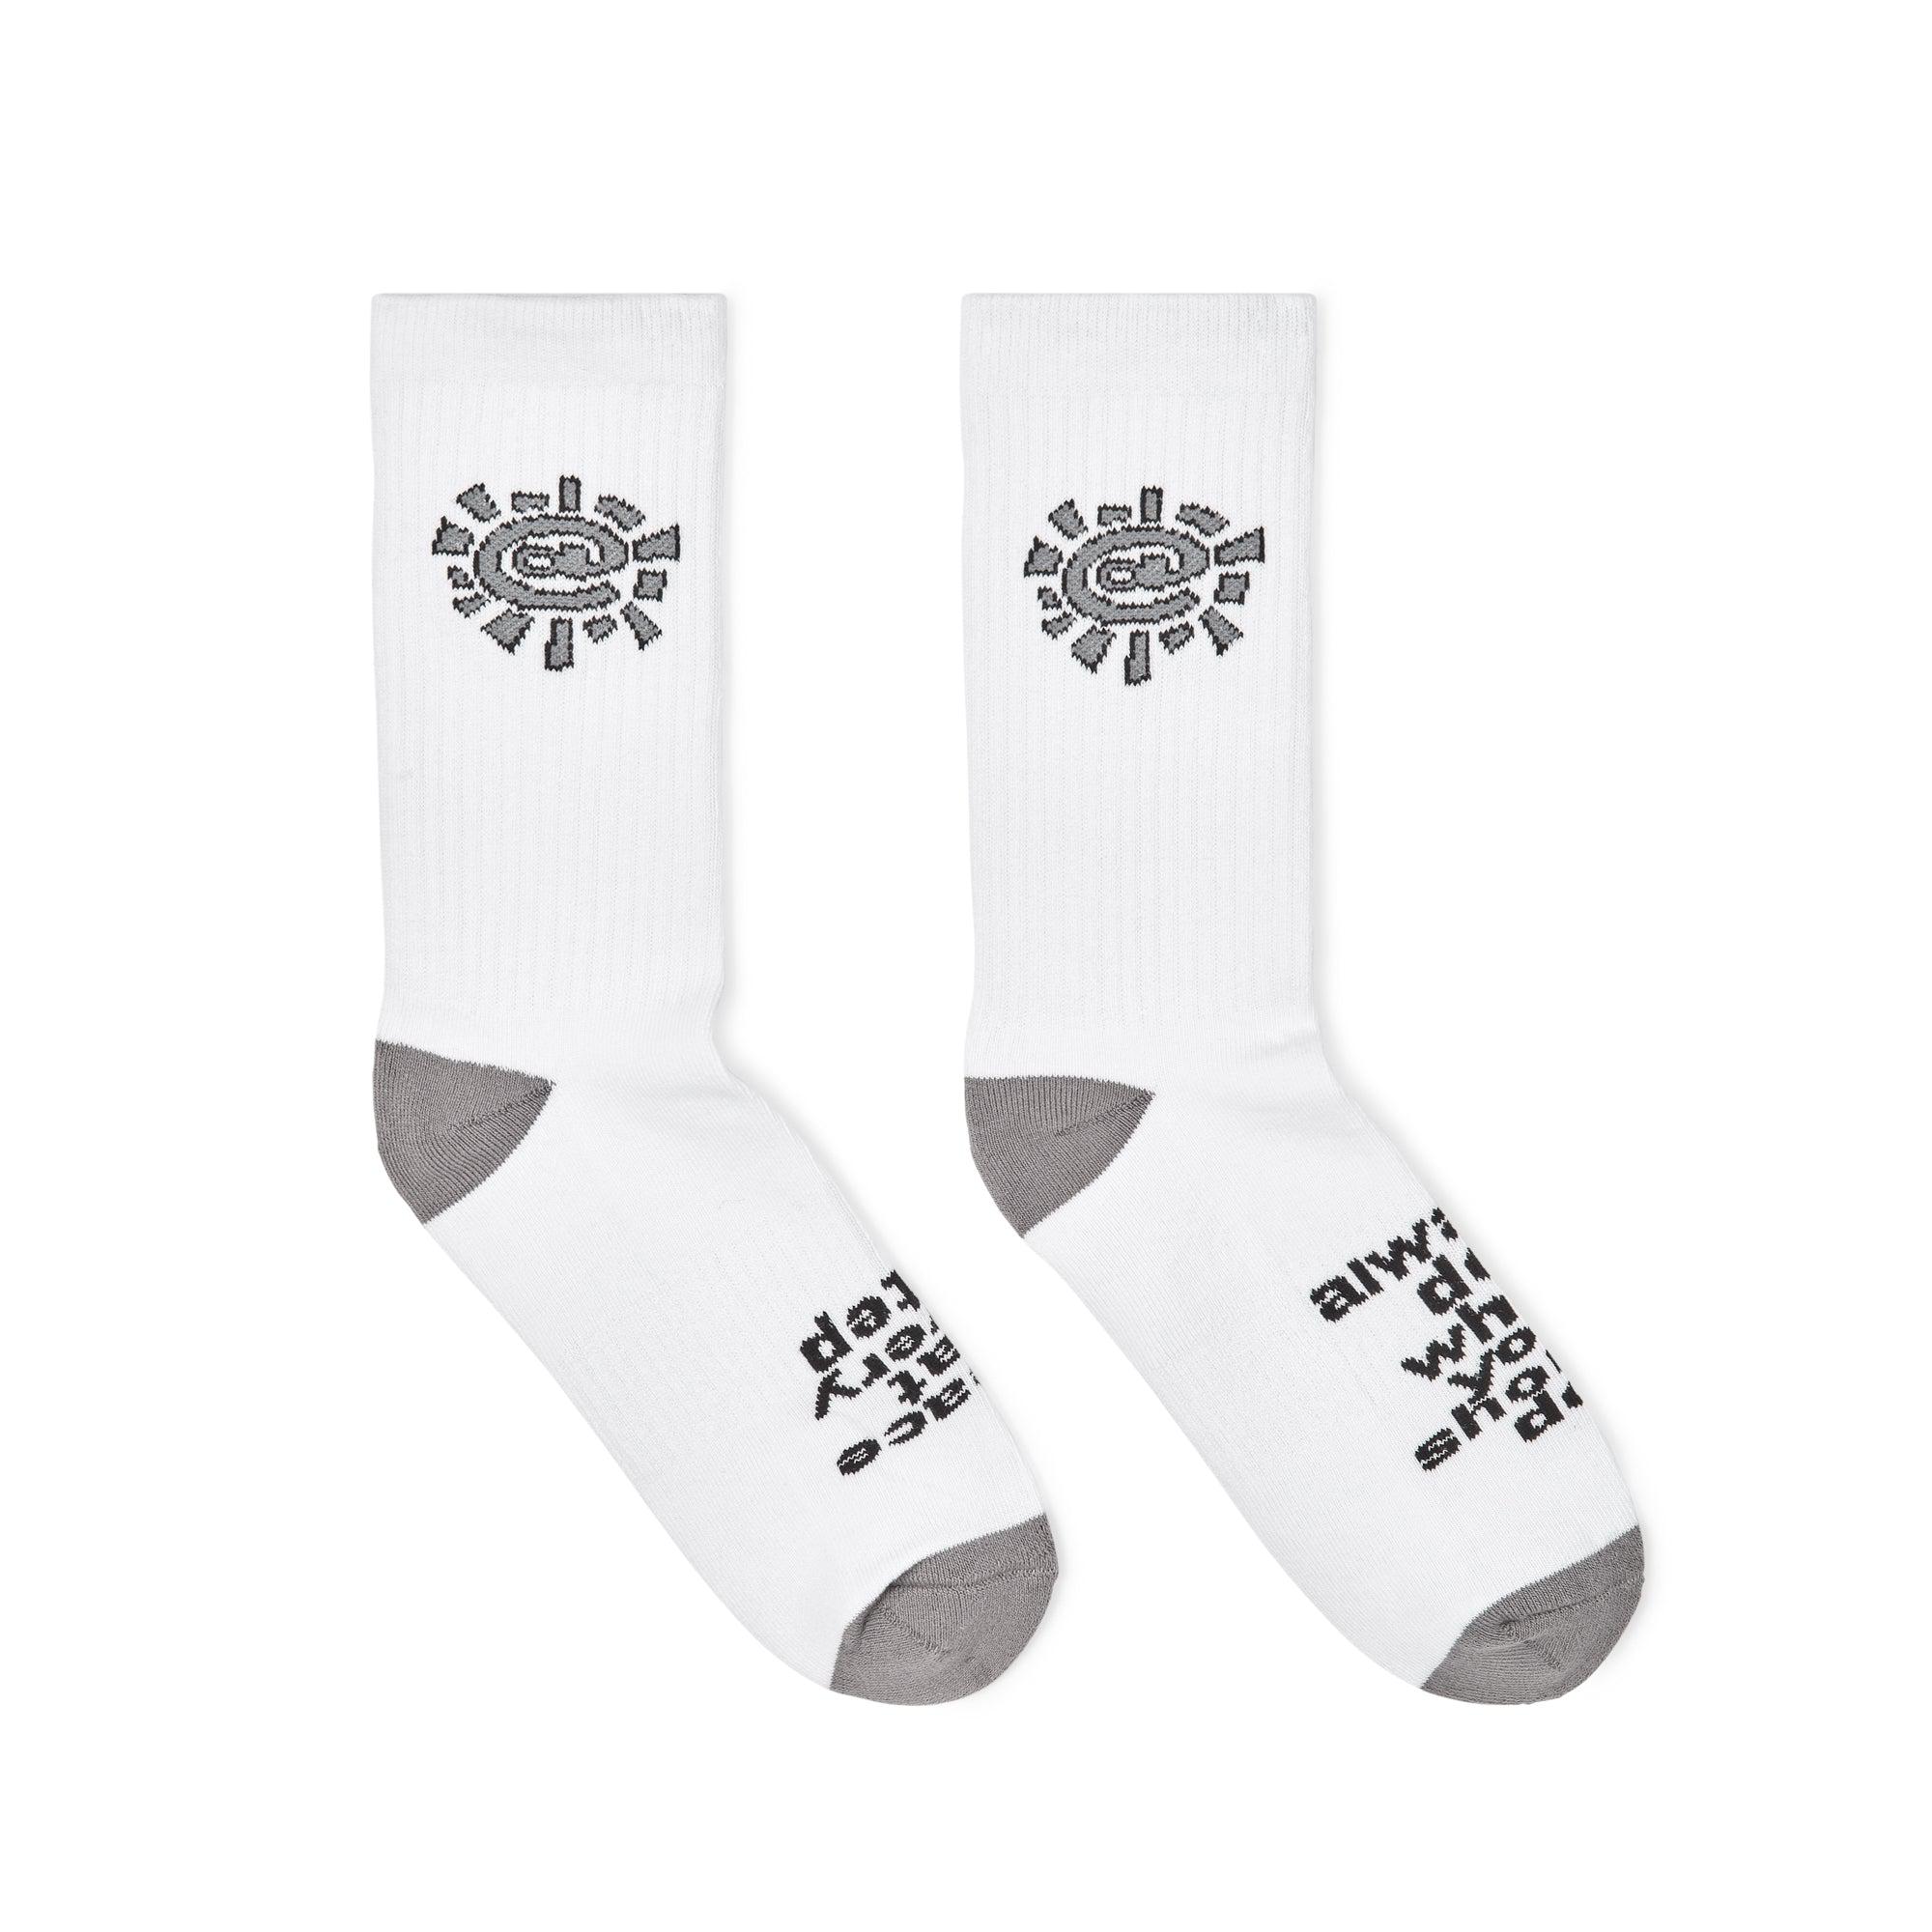 Always Do What You Should Do Socks (White) by ALWAYS DO WHAT YOU SHOULD DO